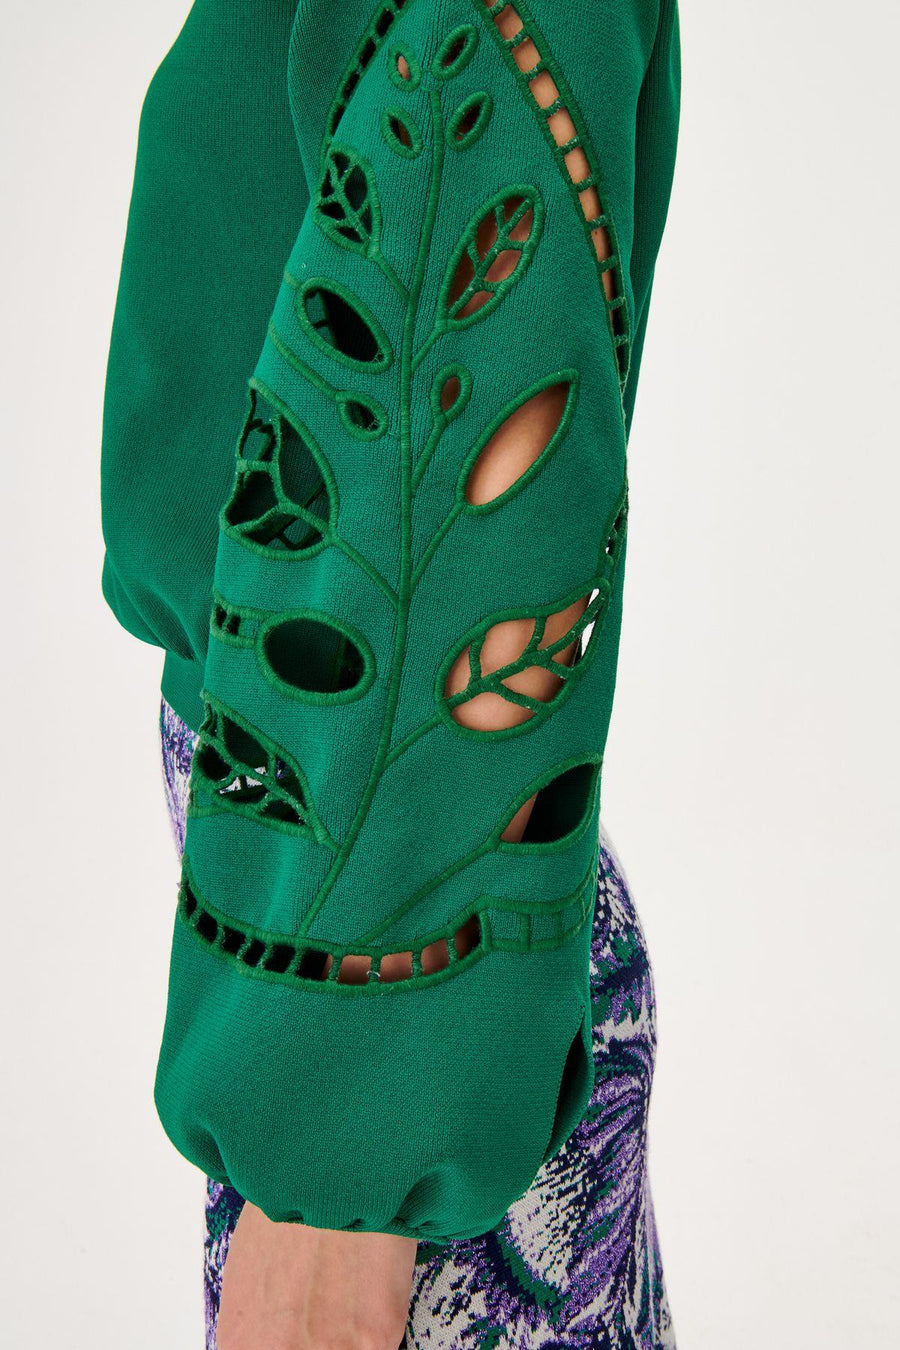 Mandarin Collar Green Knit Sweater With Embroidered Sleeves